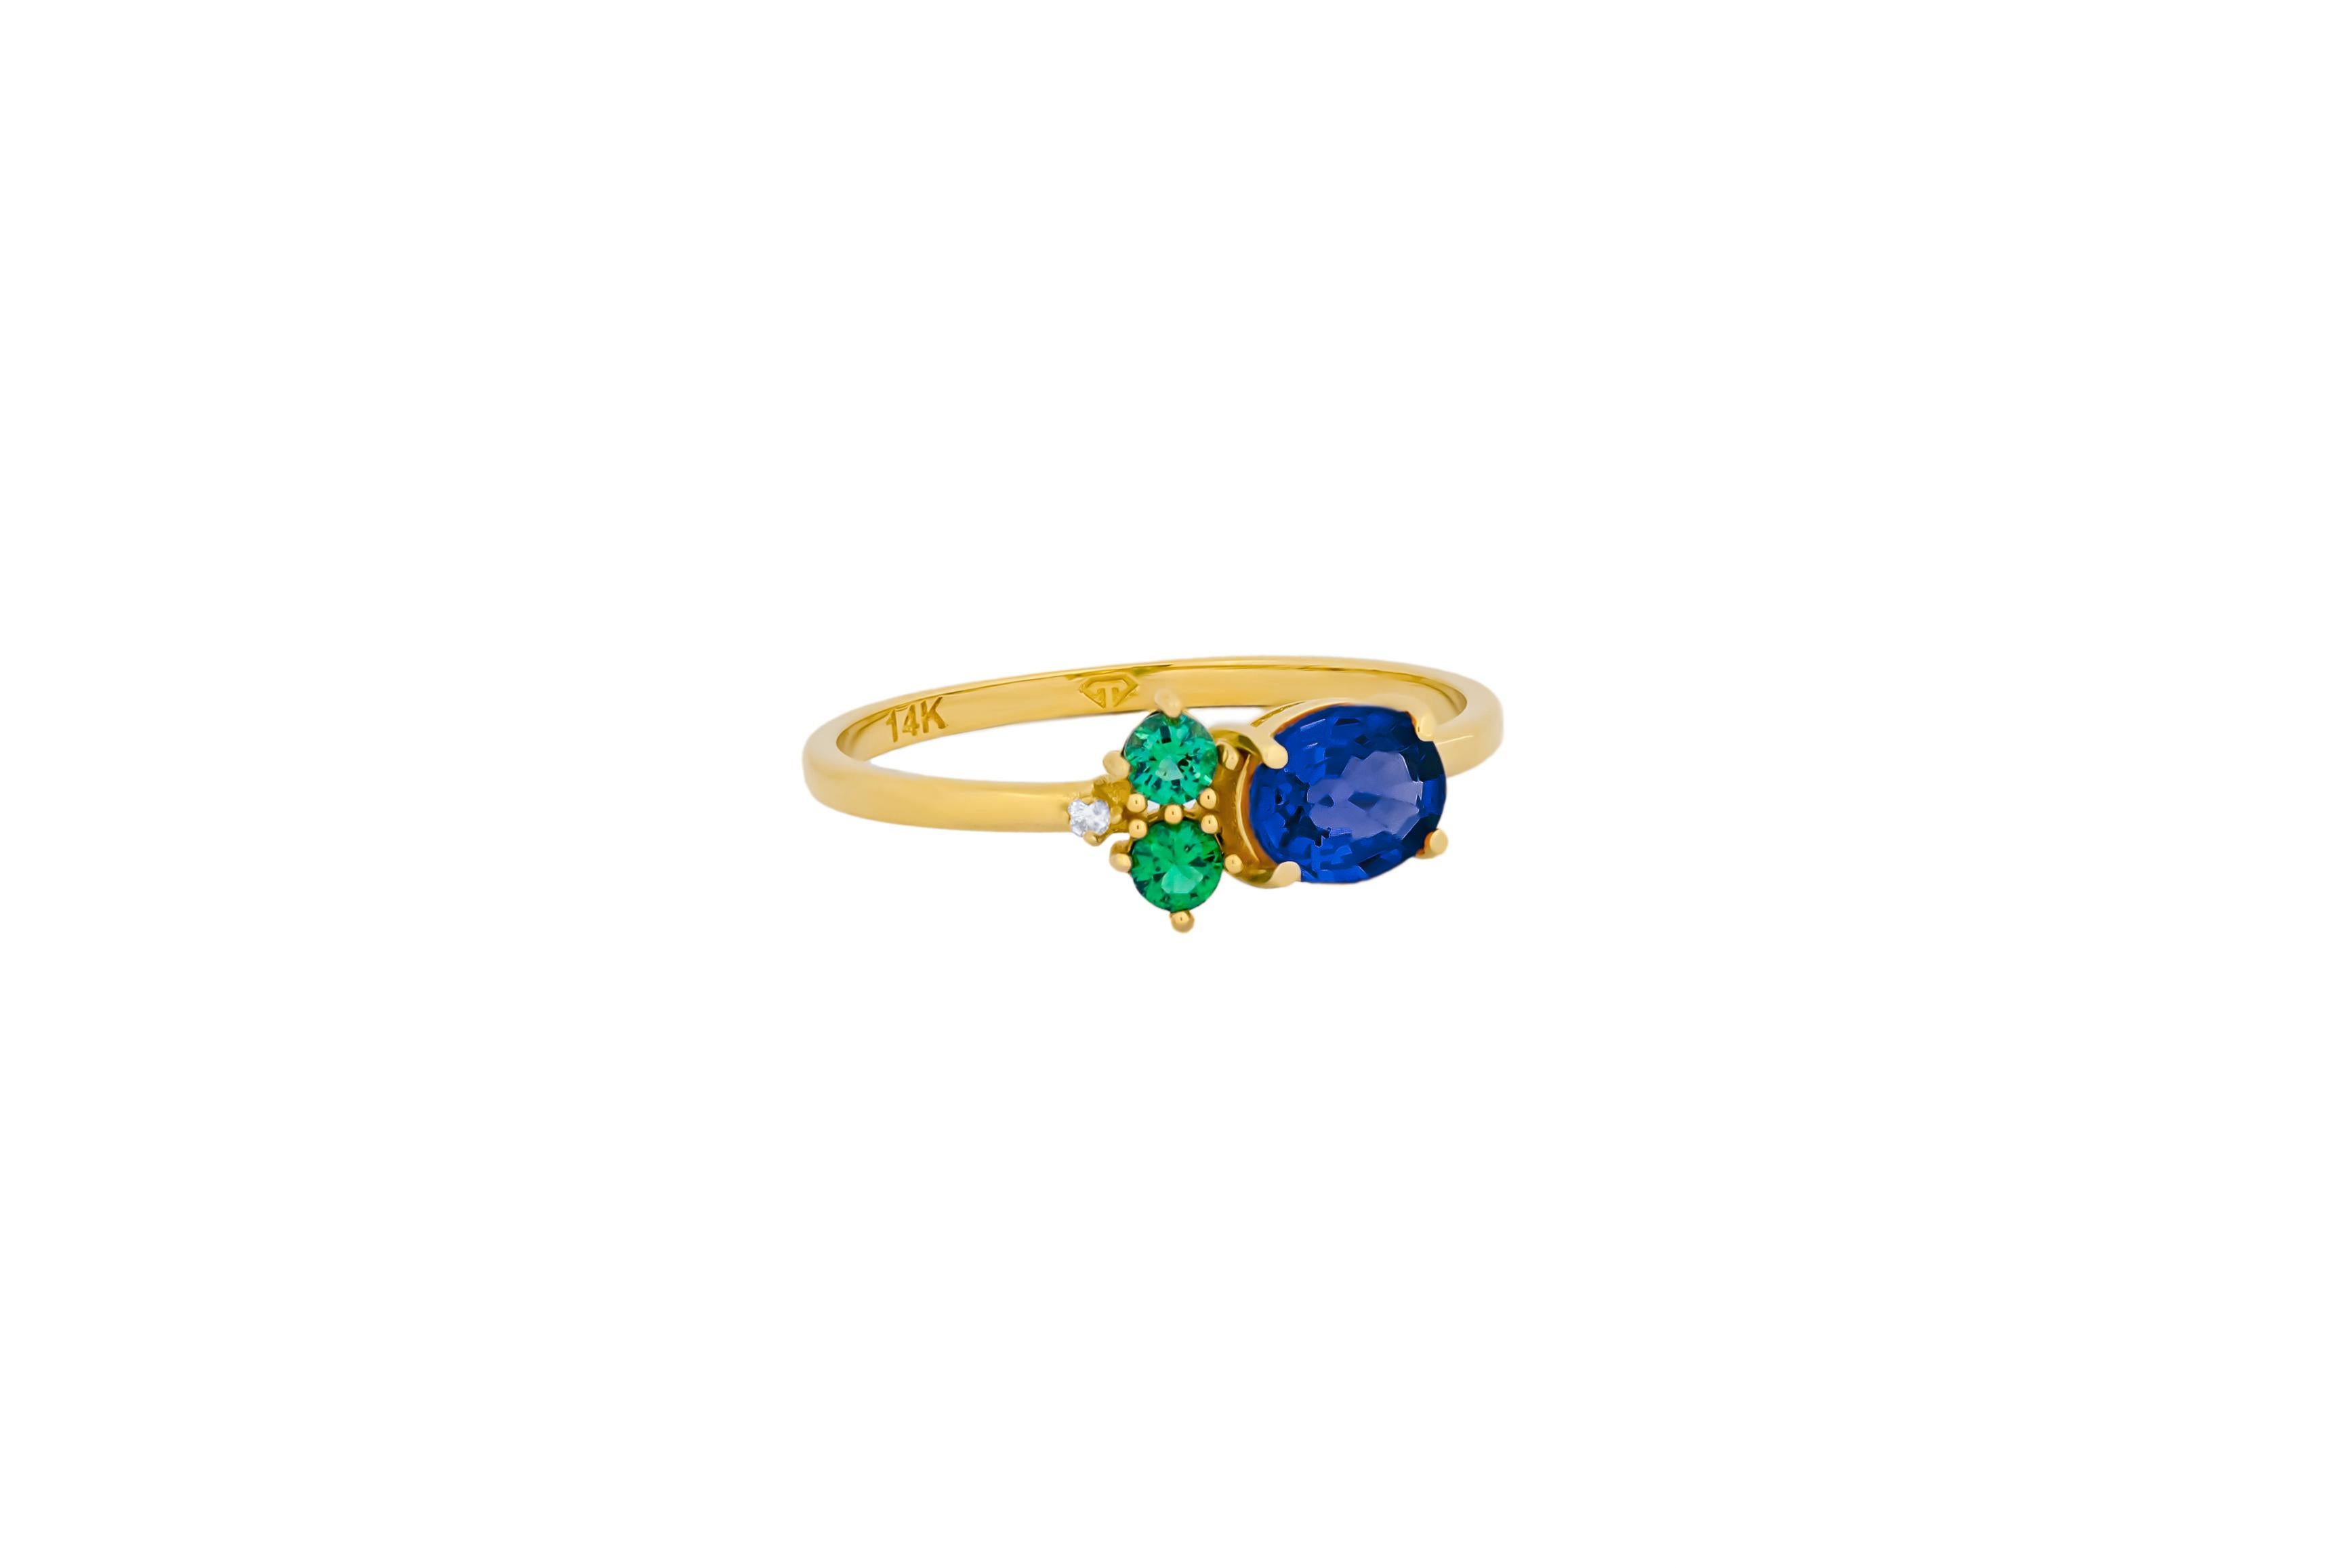 For Sale:  Oval sapphire, tsavorite and diamonds 14k gold ring. 4